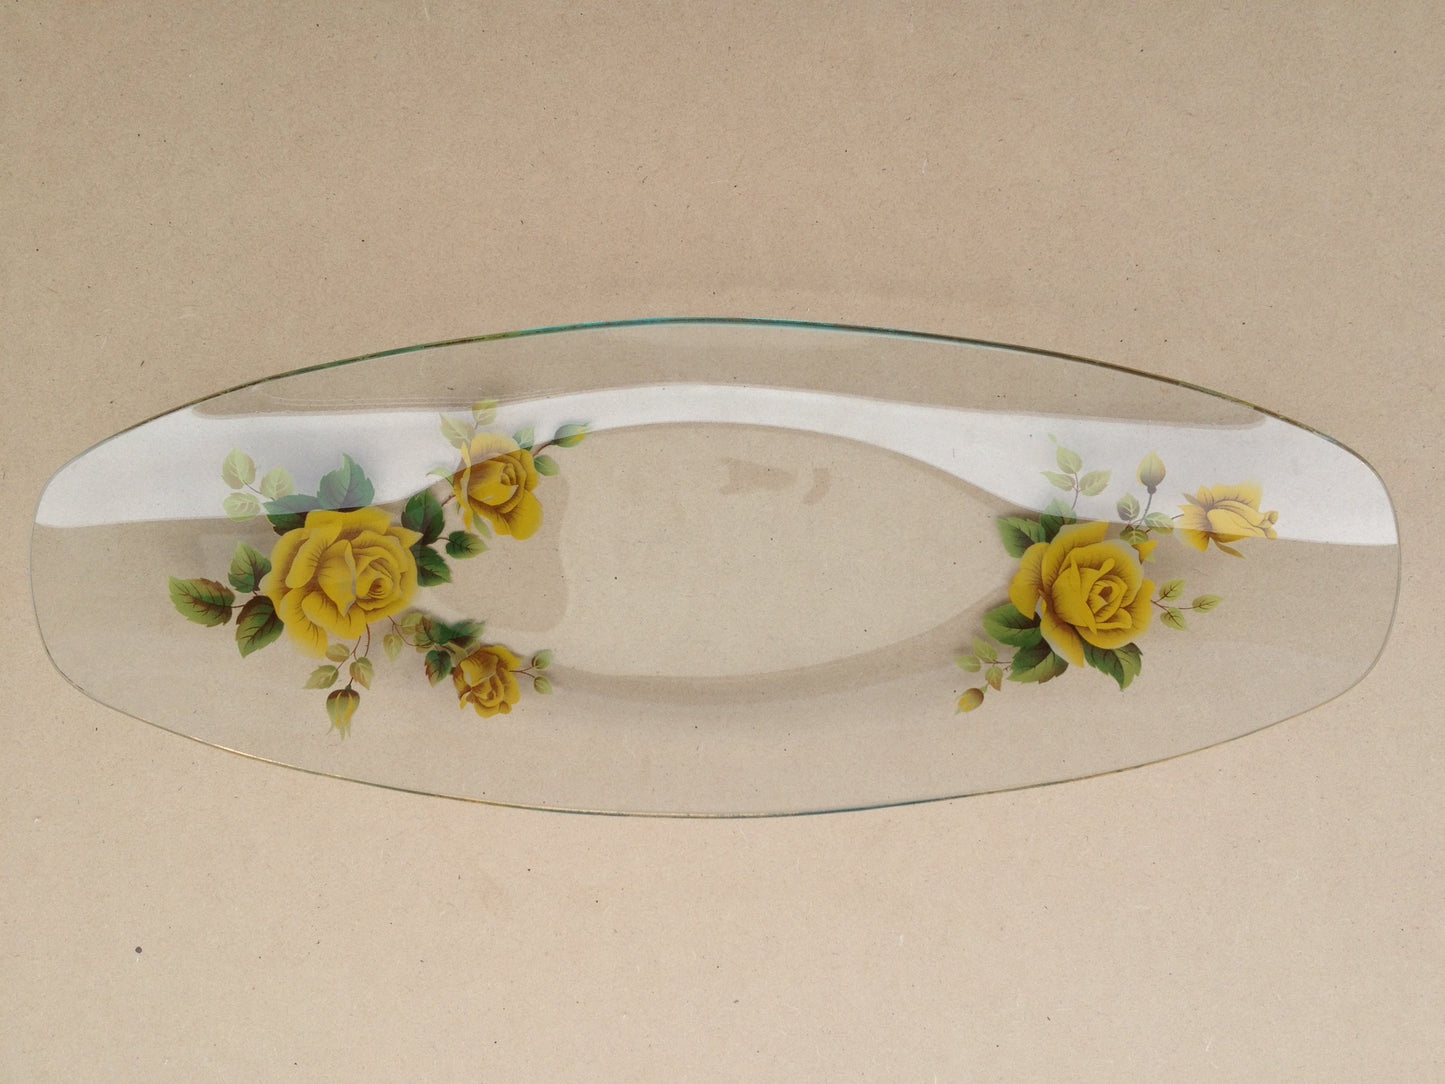 Glass Sandwich Plate Featuring Yellow Roses